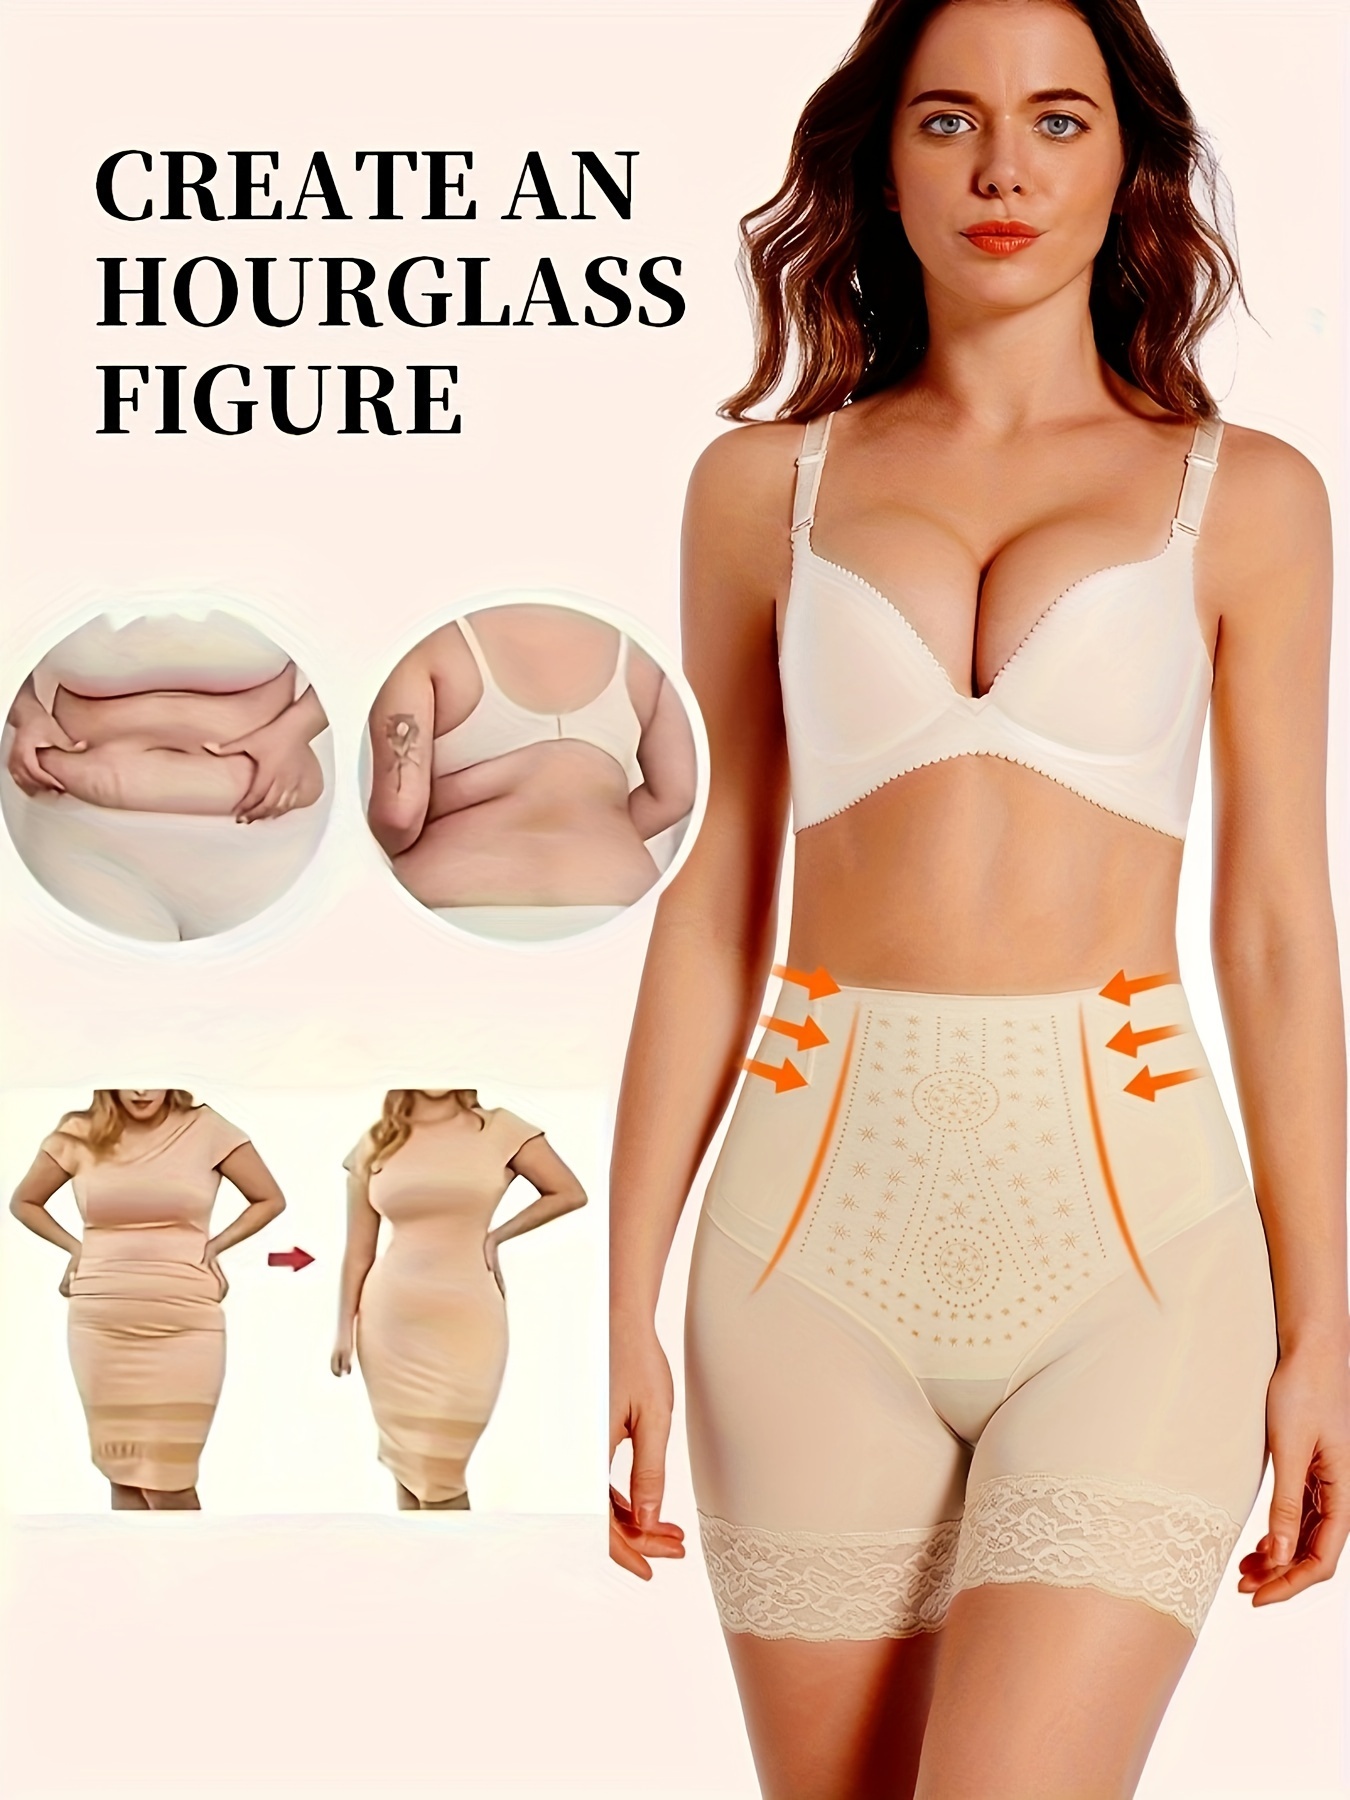 How to Get an Hourglass Figure Using Underwear